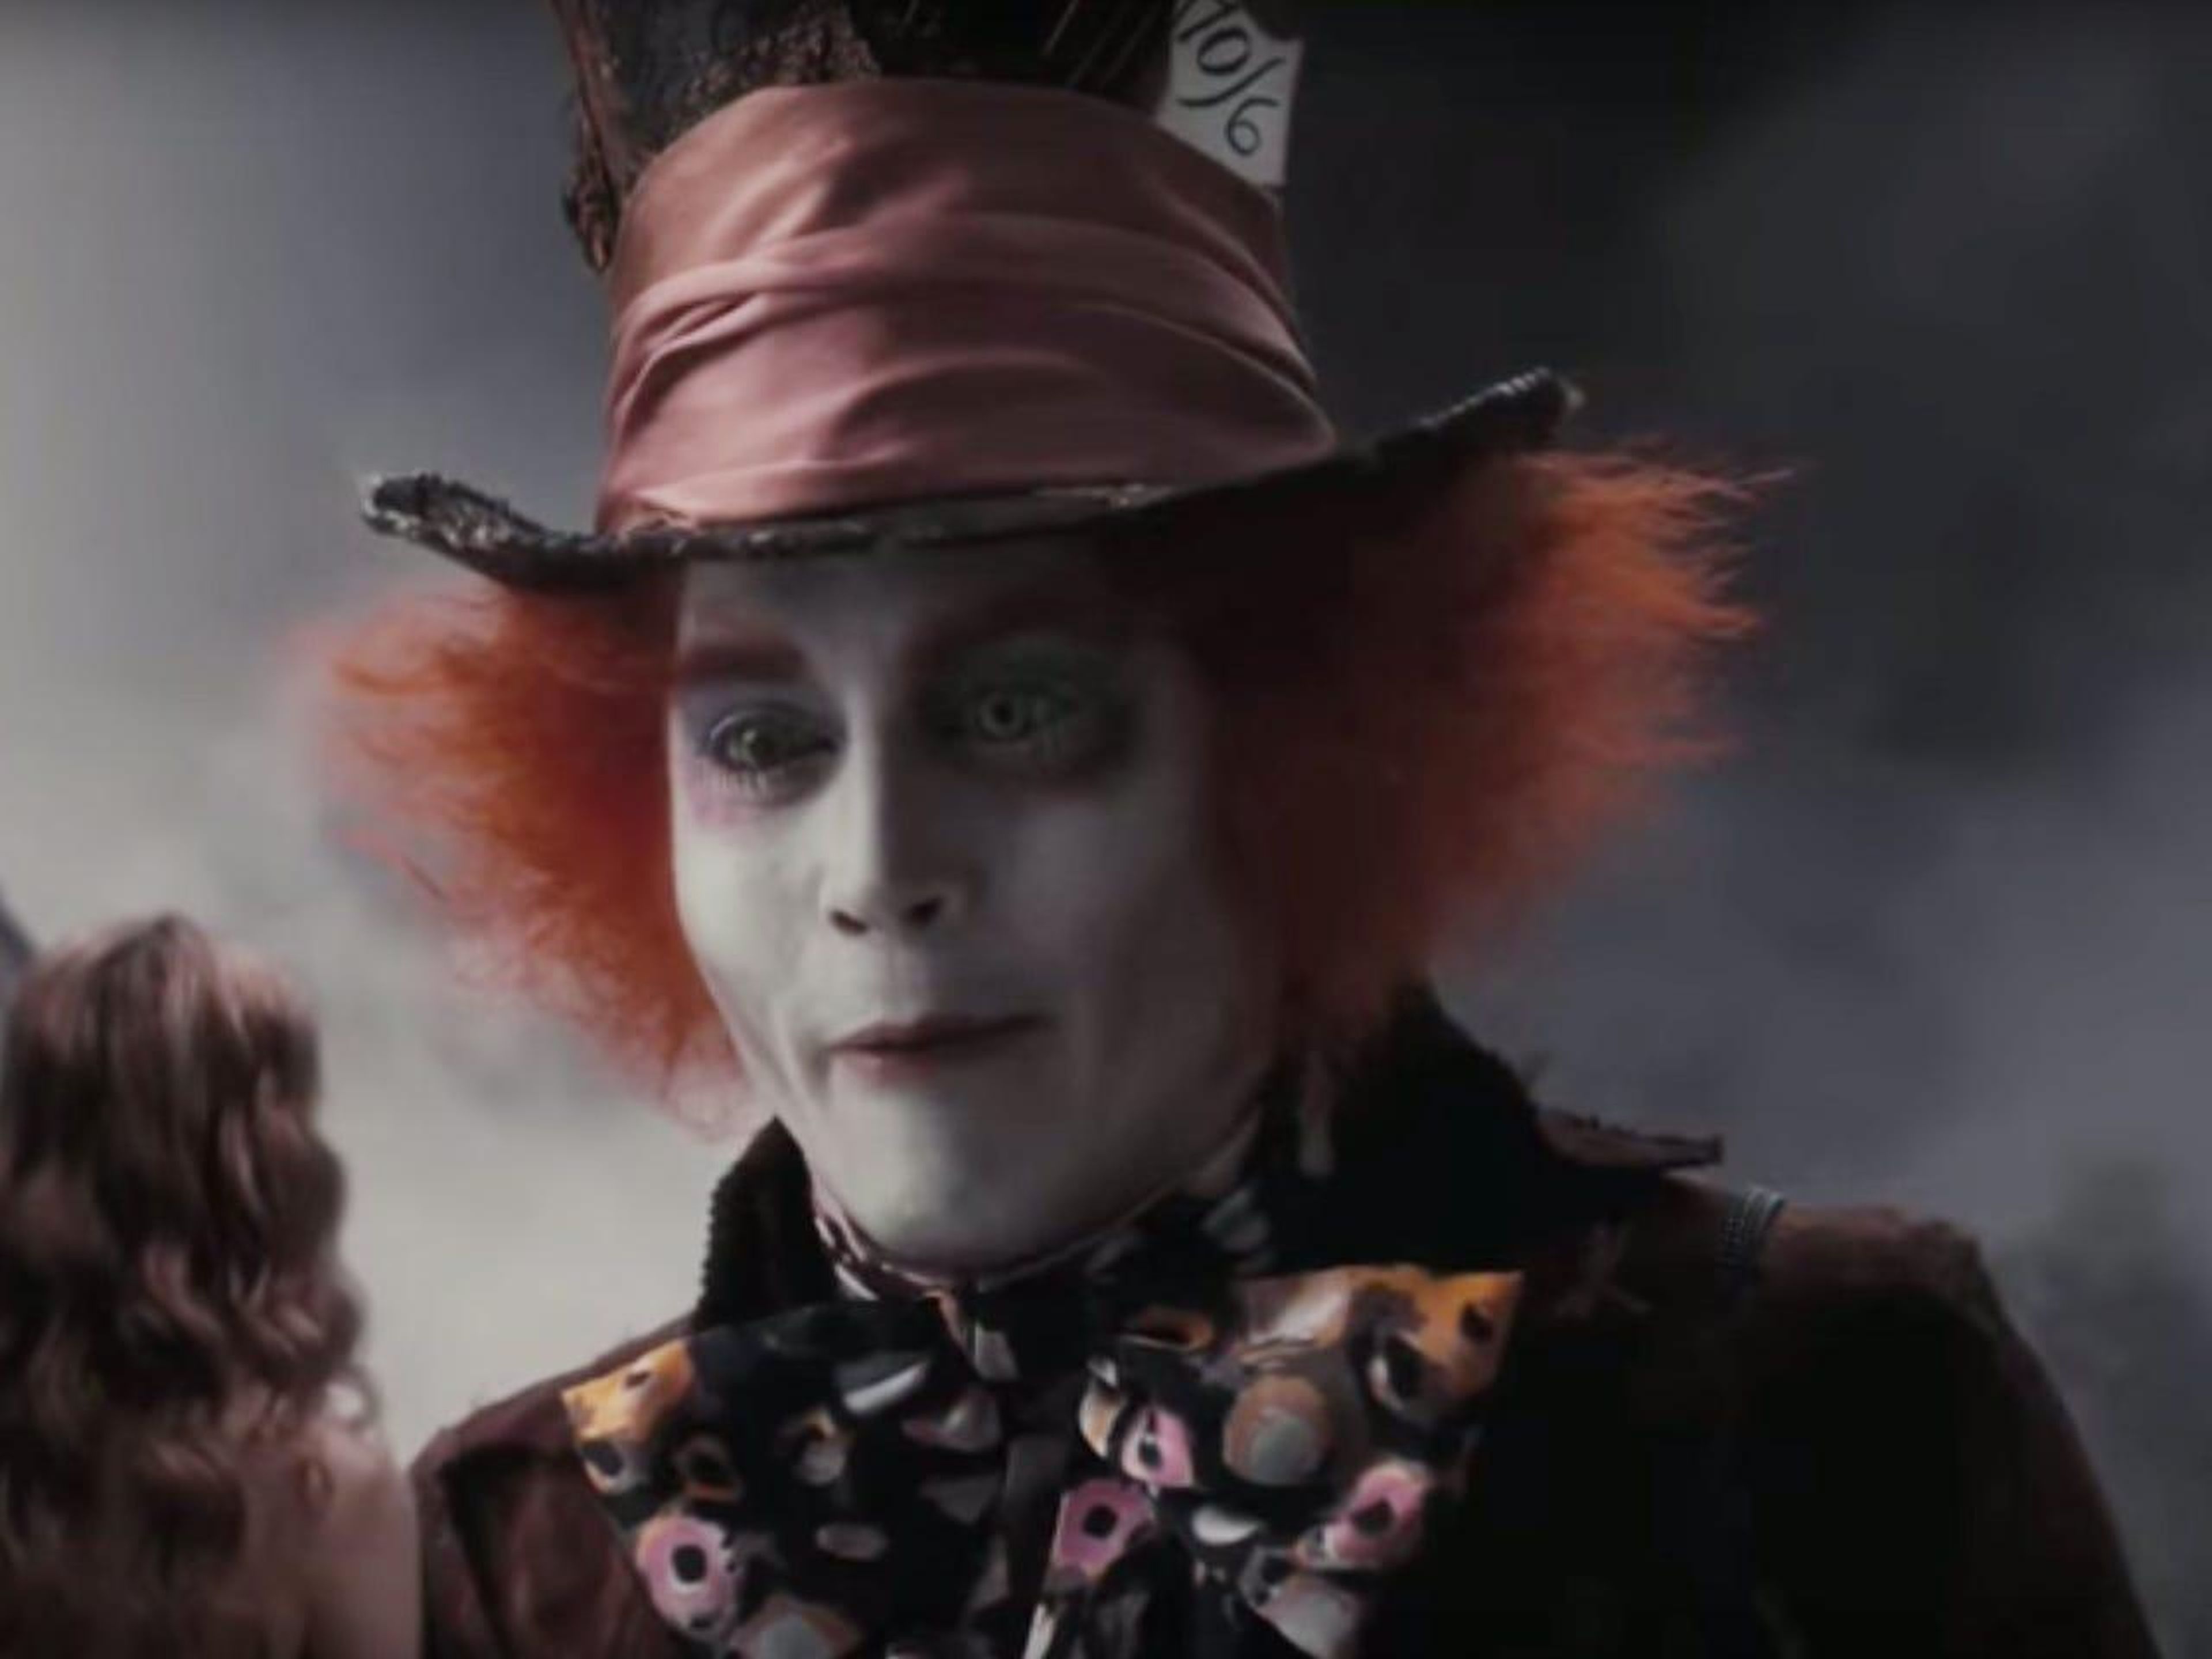 6. Johnny Depp as The Mad Hatter in "Alice in Wonderland"